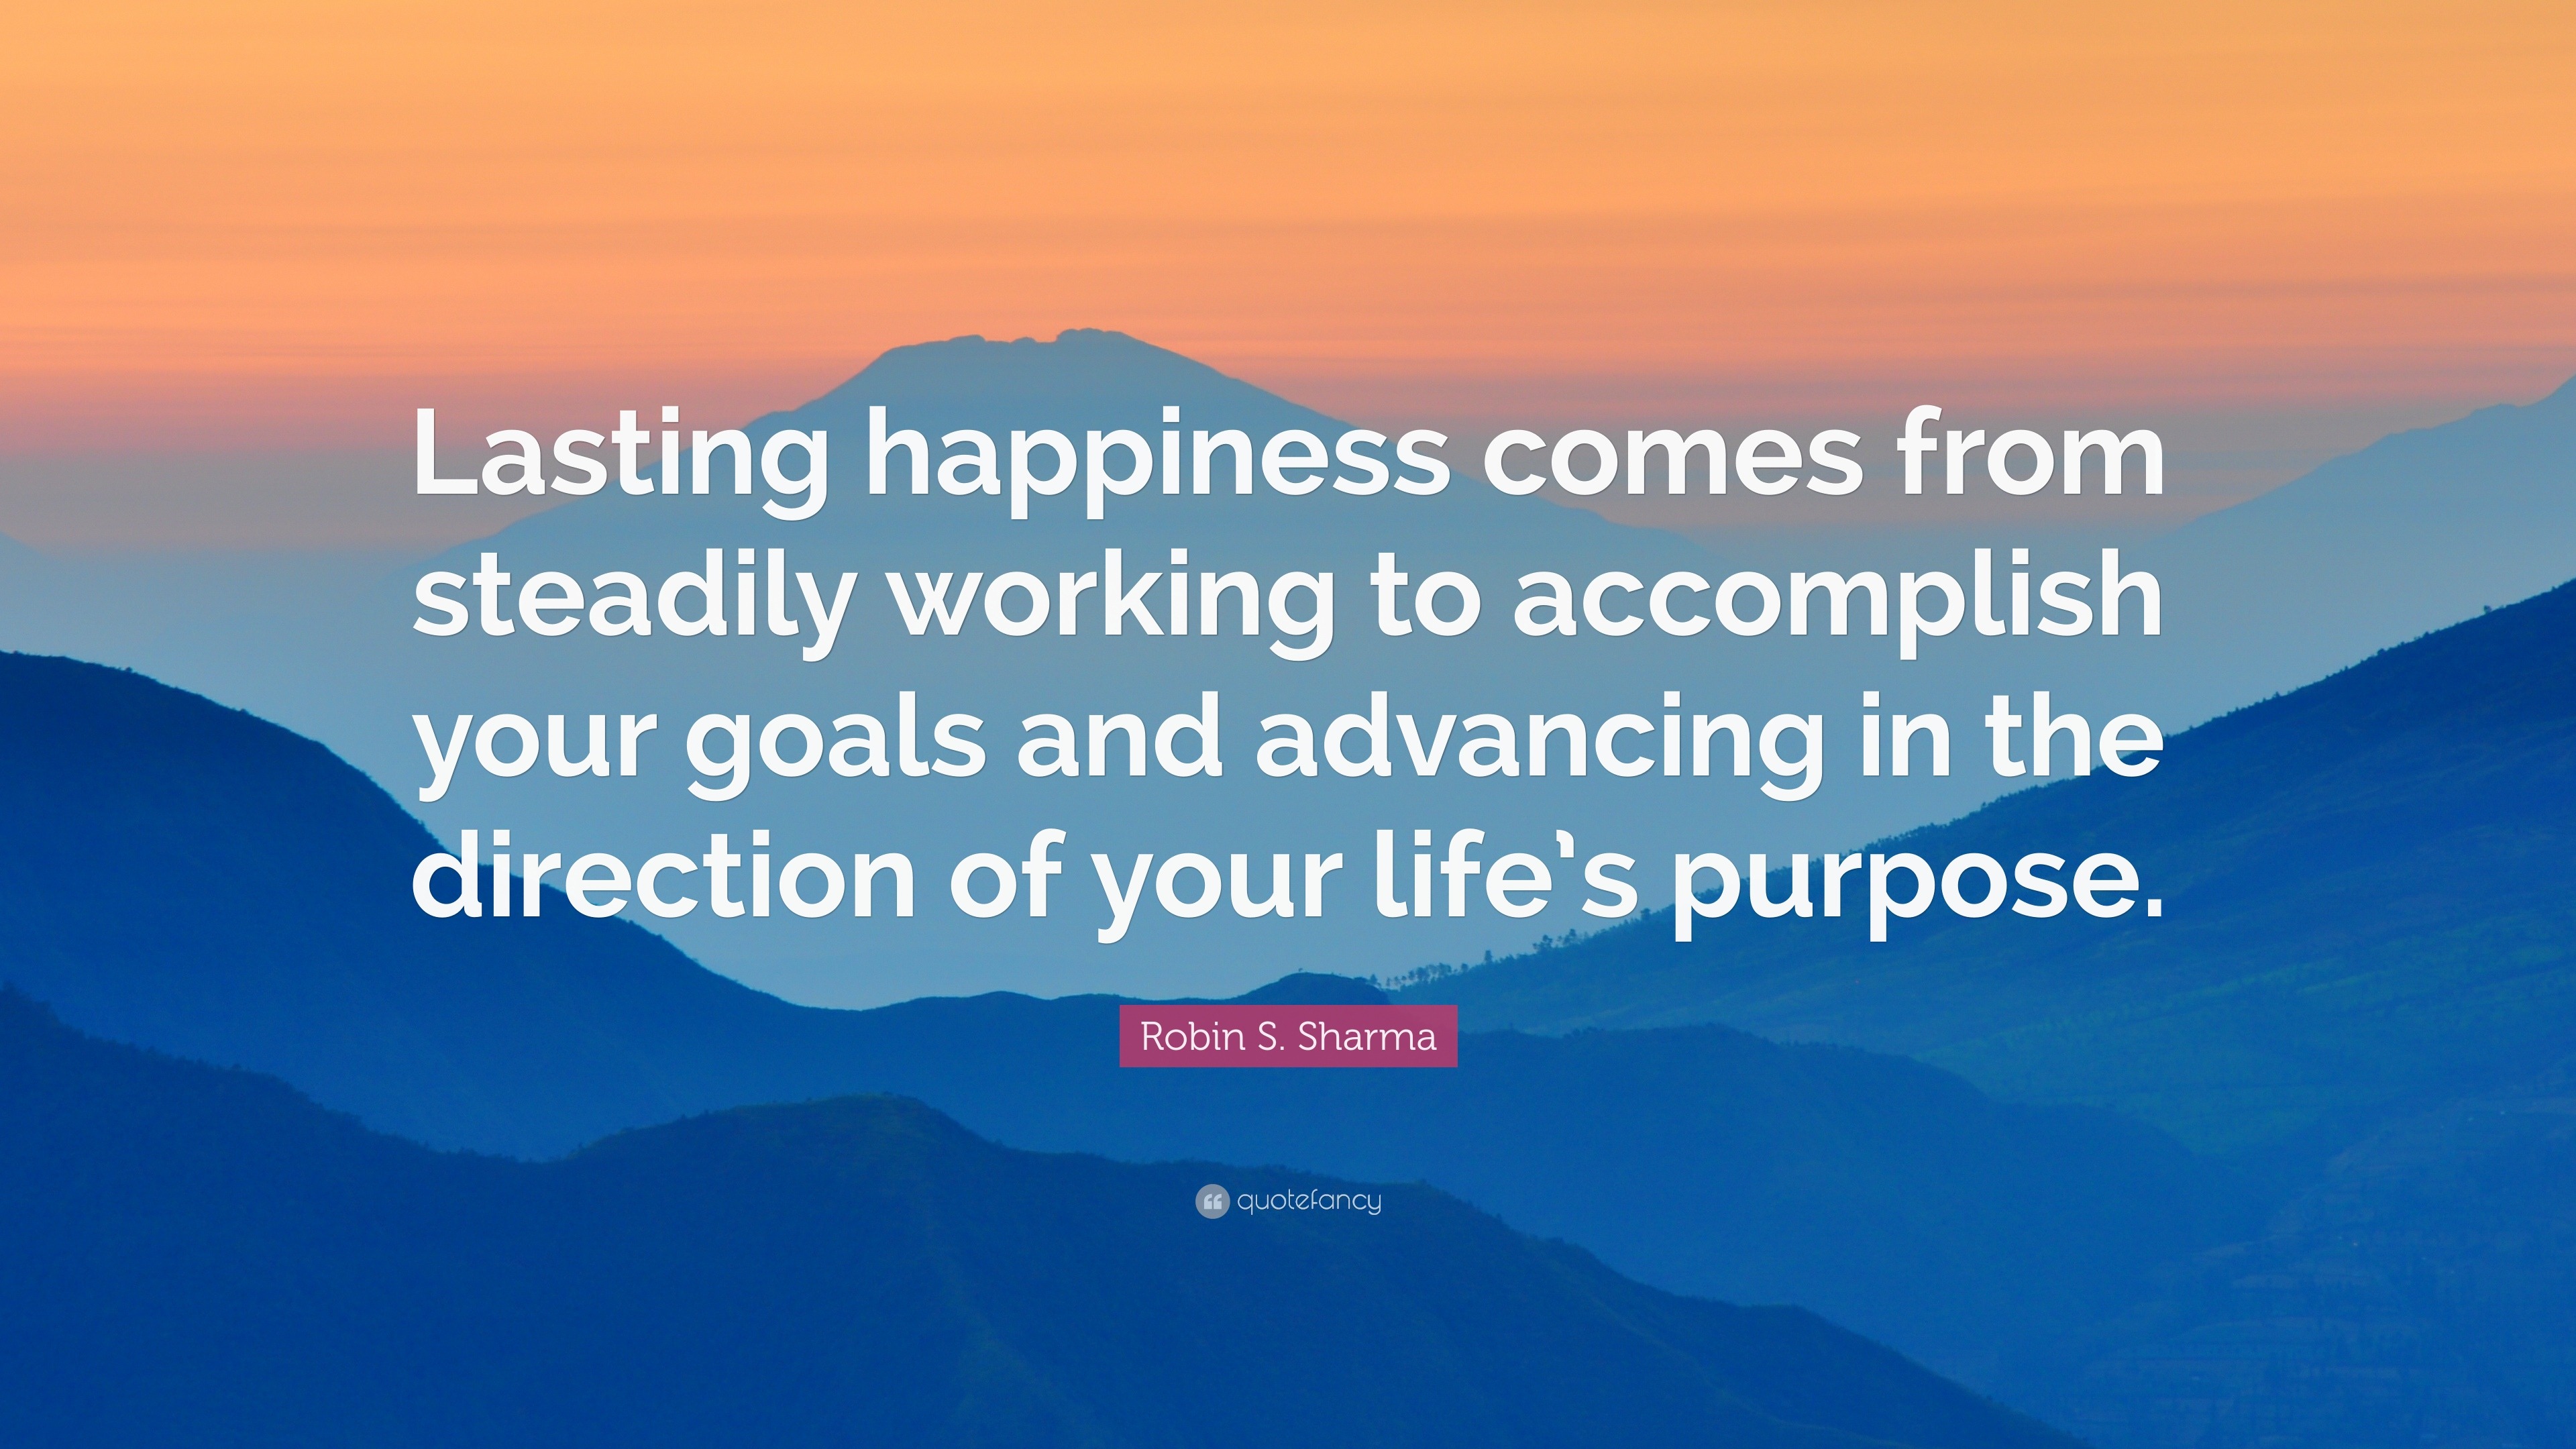 Robin S. Sharma Quote: “Lasting happiness comes from steadily working ...